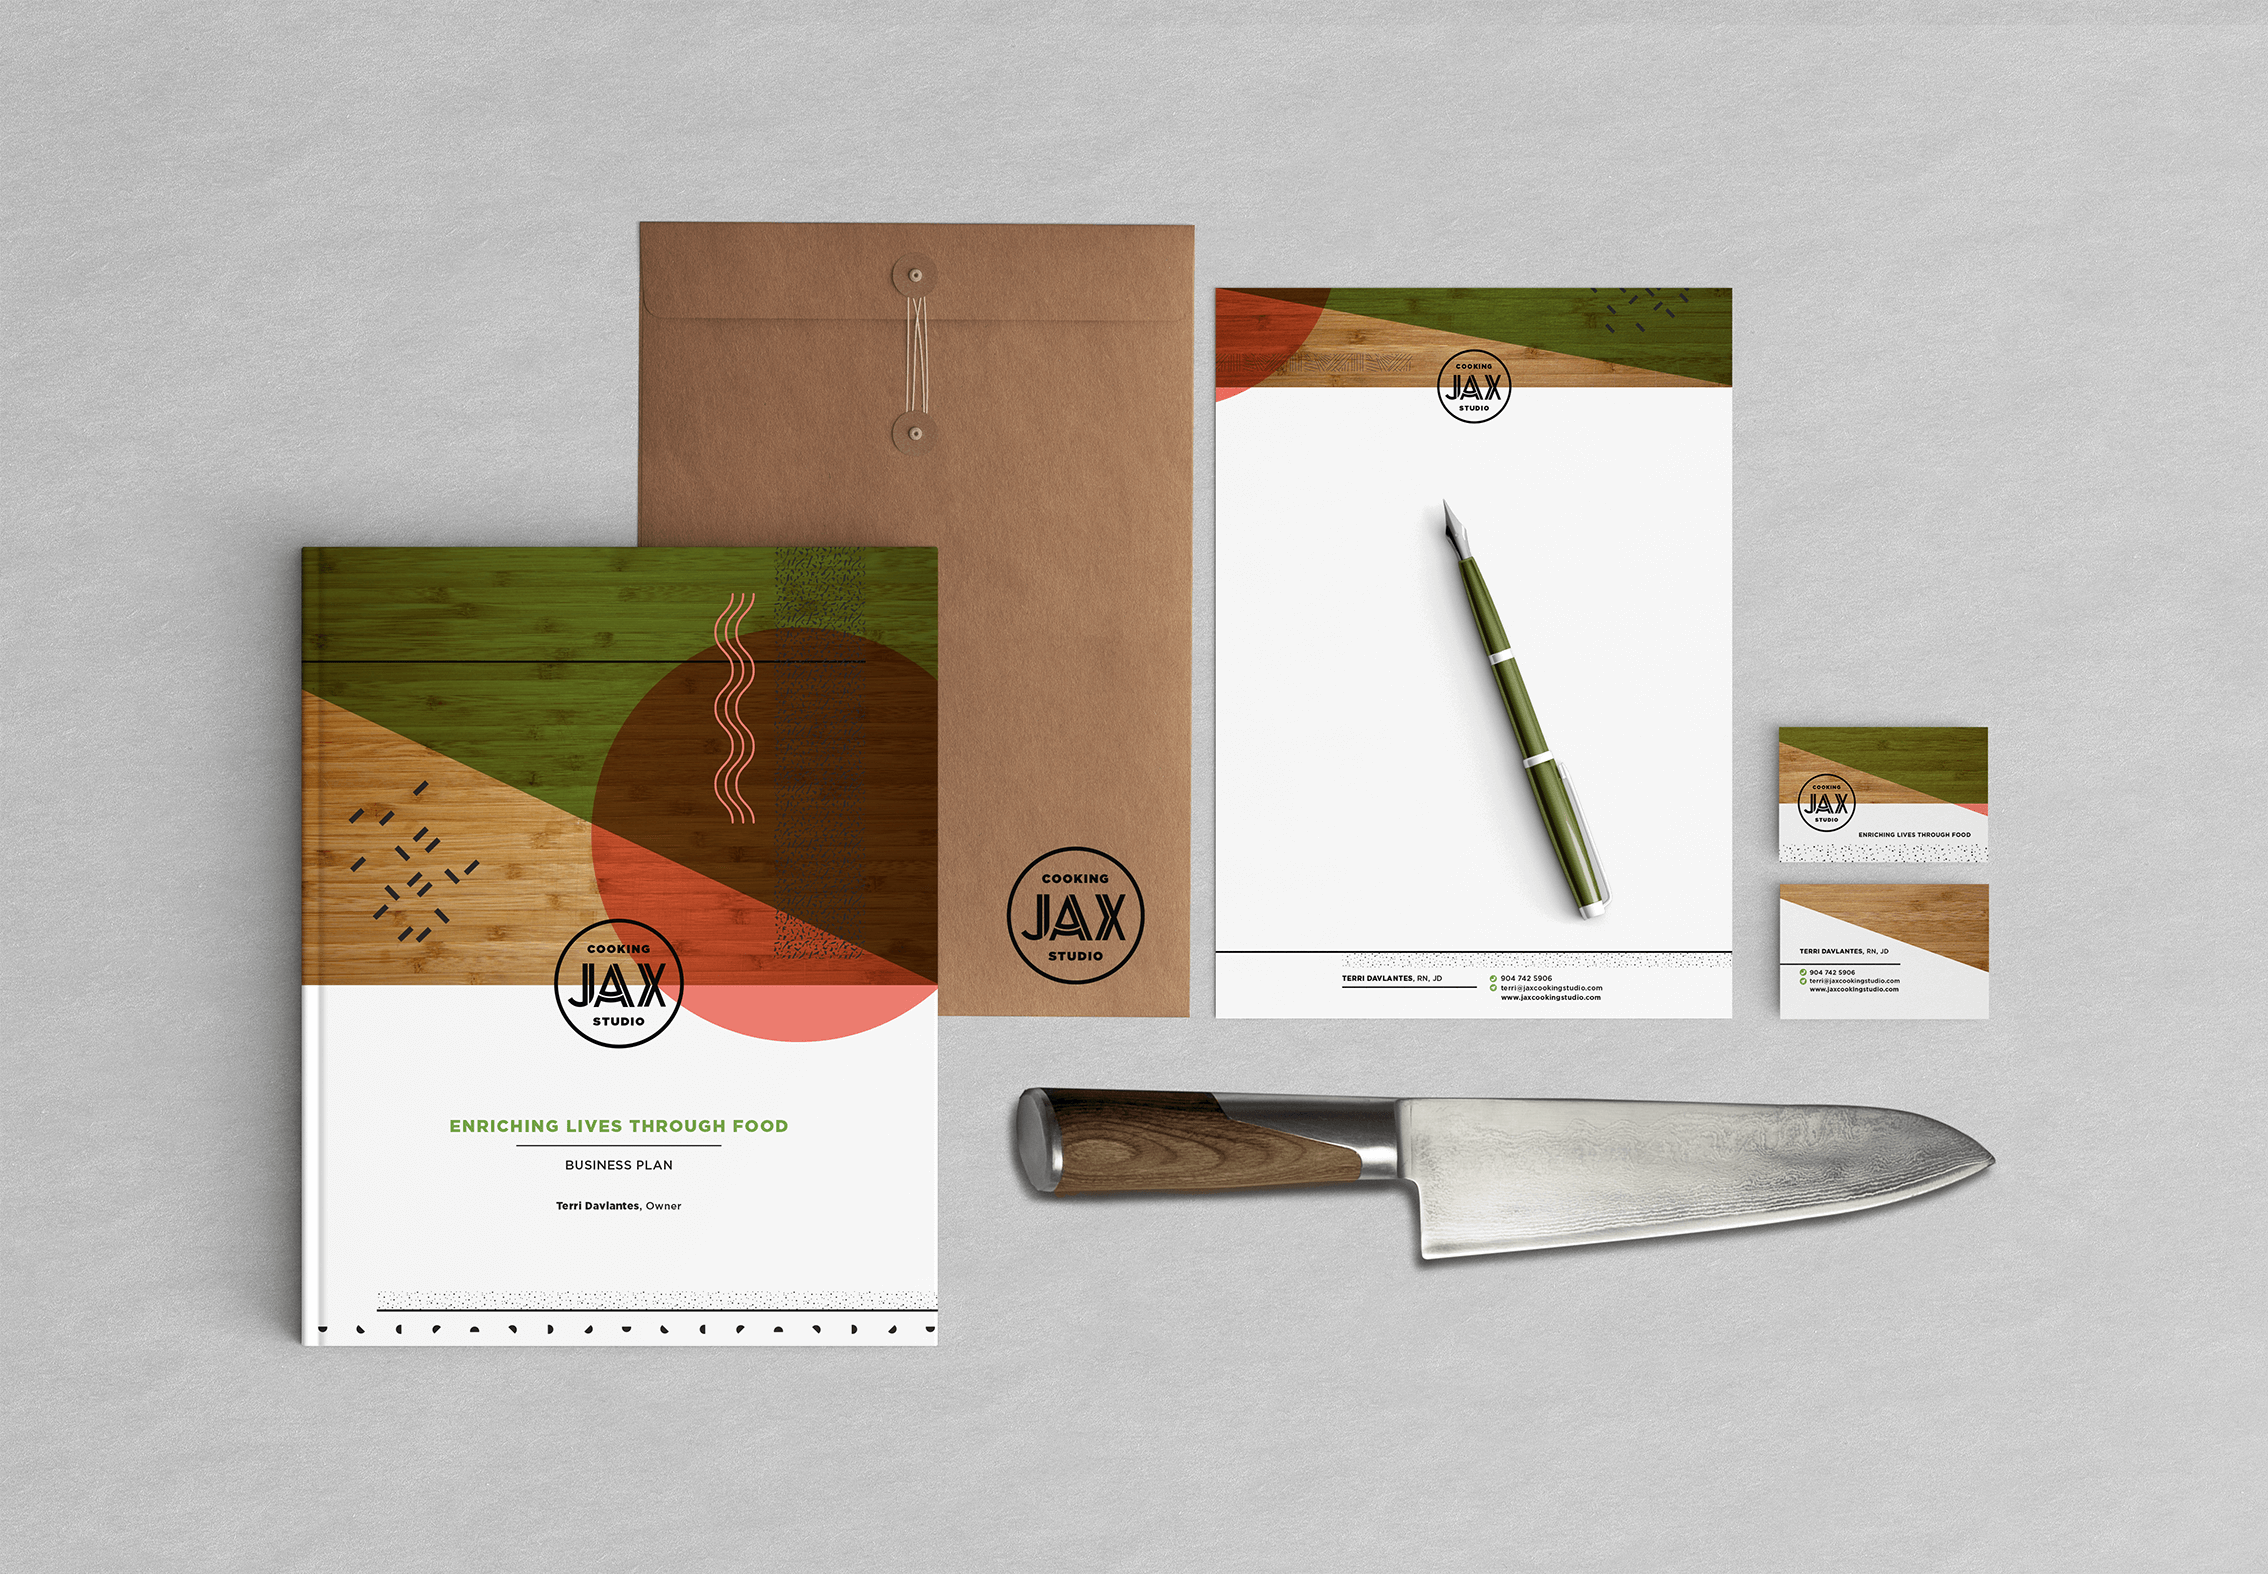 A notebook, letterhead, envelope, and business cards illustrating the JAX Cooking Studio business design system. A green pen and chef's knife provide extra setting.